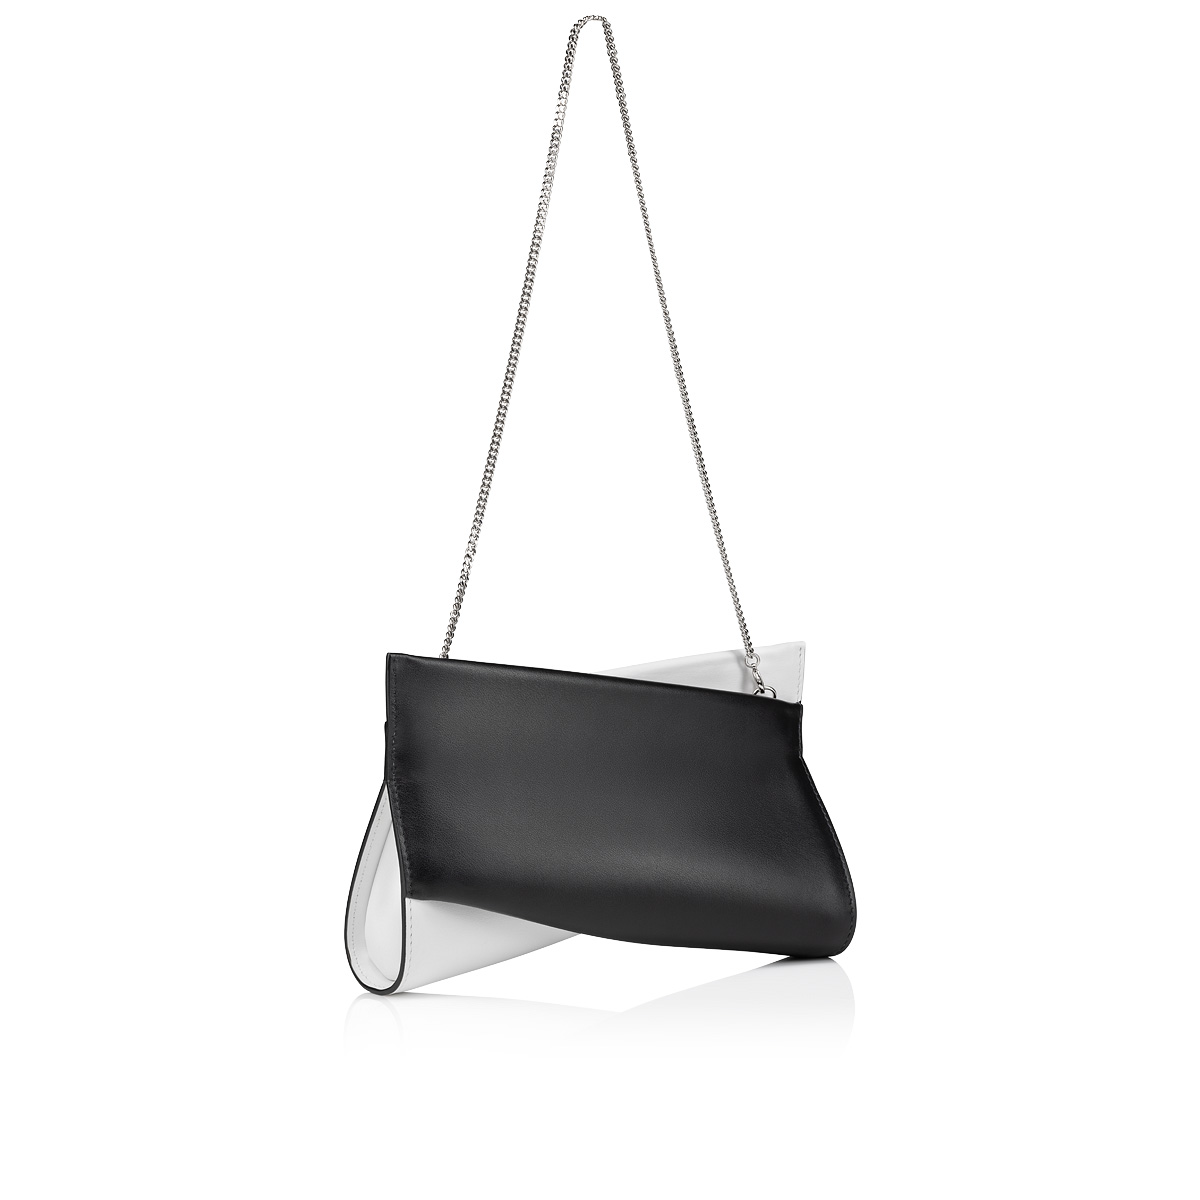 Christian Louboutin Loubicute Clutch Bag in Black Leather with